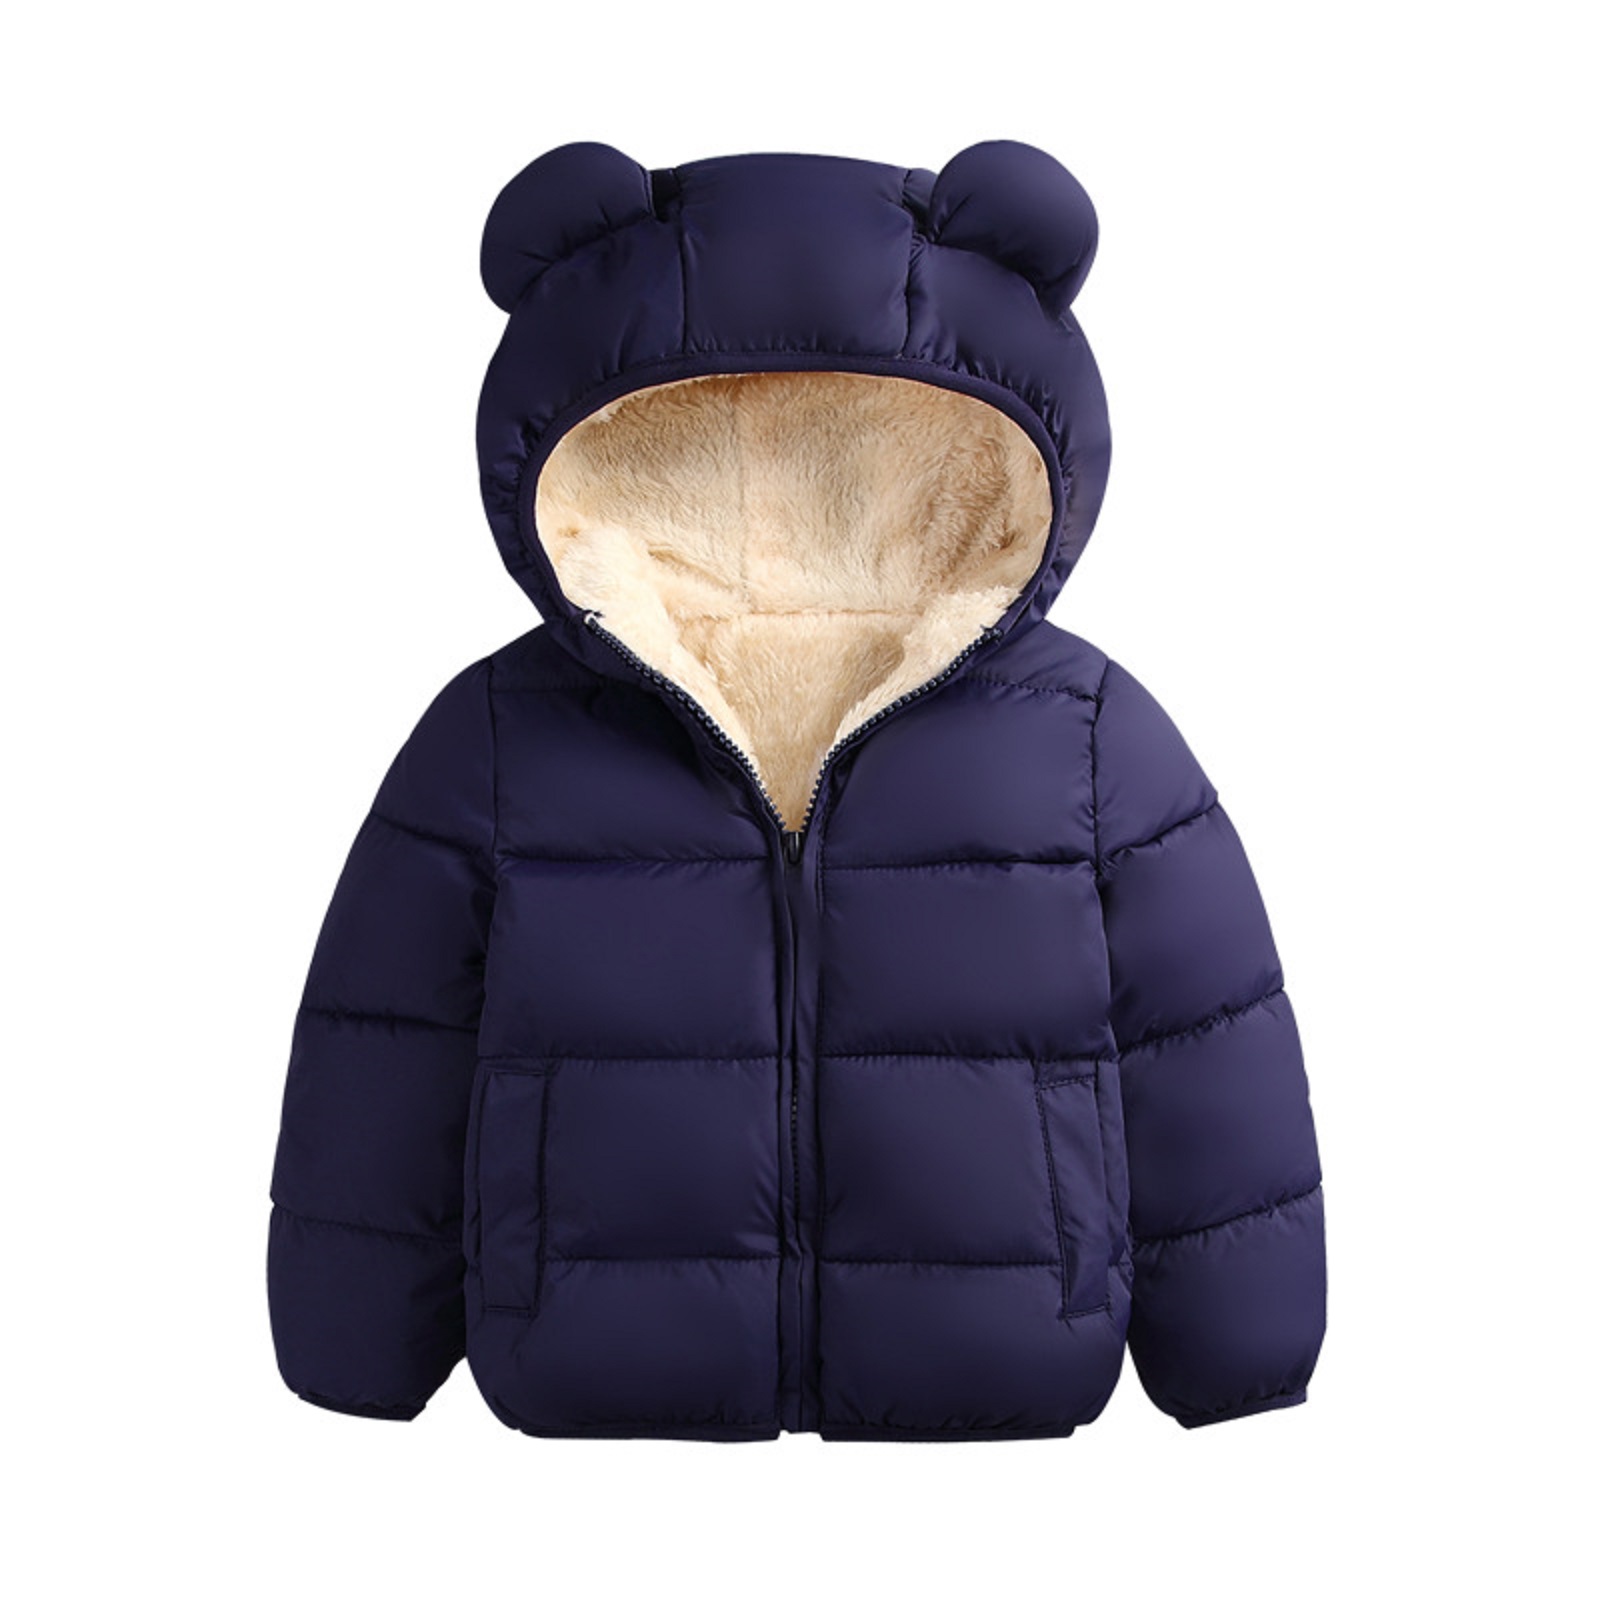 Kids Baby Girls Boys Down Parkas Coat Bear Ears Hooded Padded Jacket Parkas Long Sleeve Zipper Cotton Coats Children Sports Parkas Outfits Outerwear - image 1 of 2